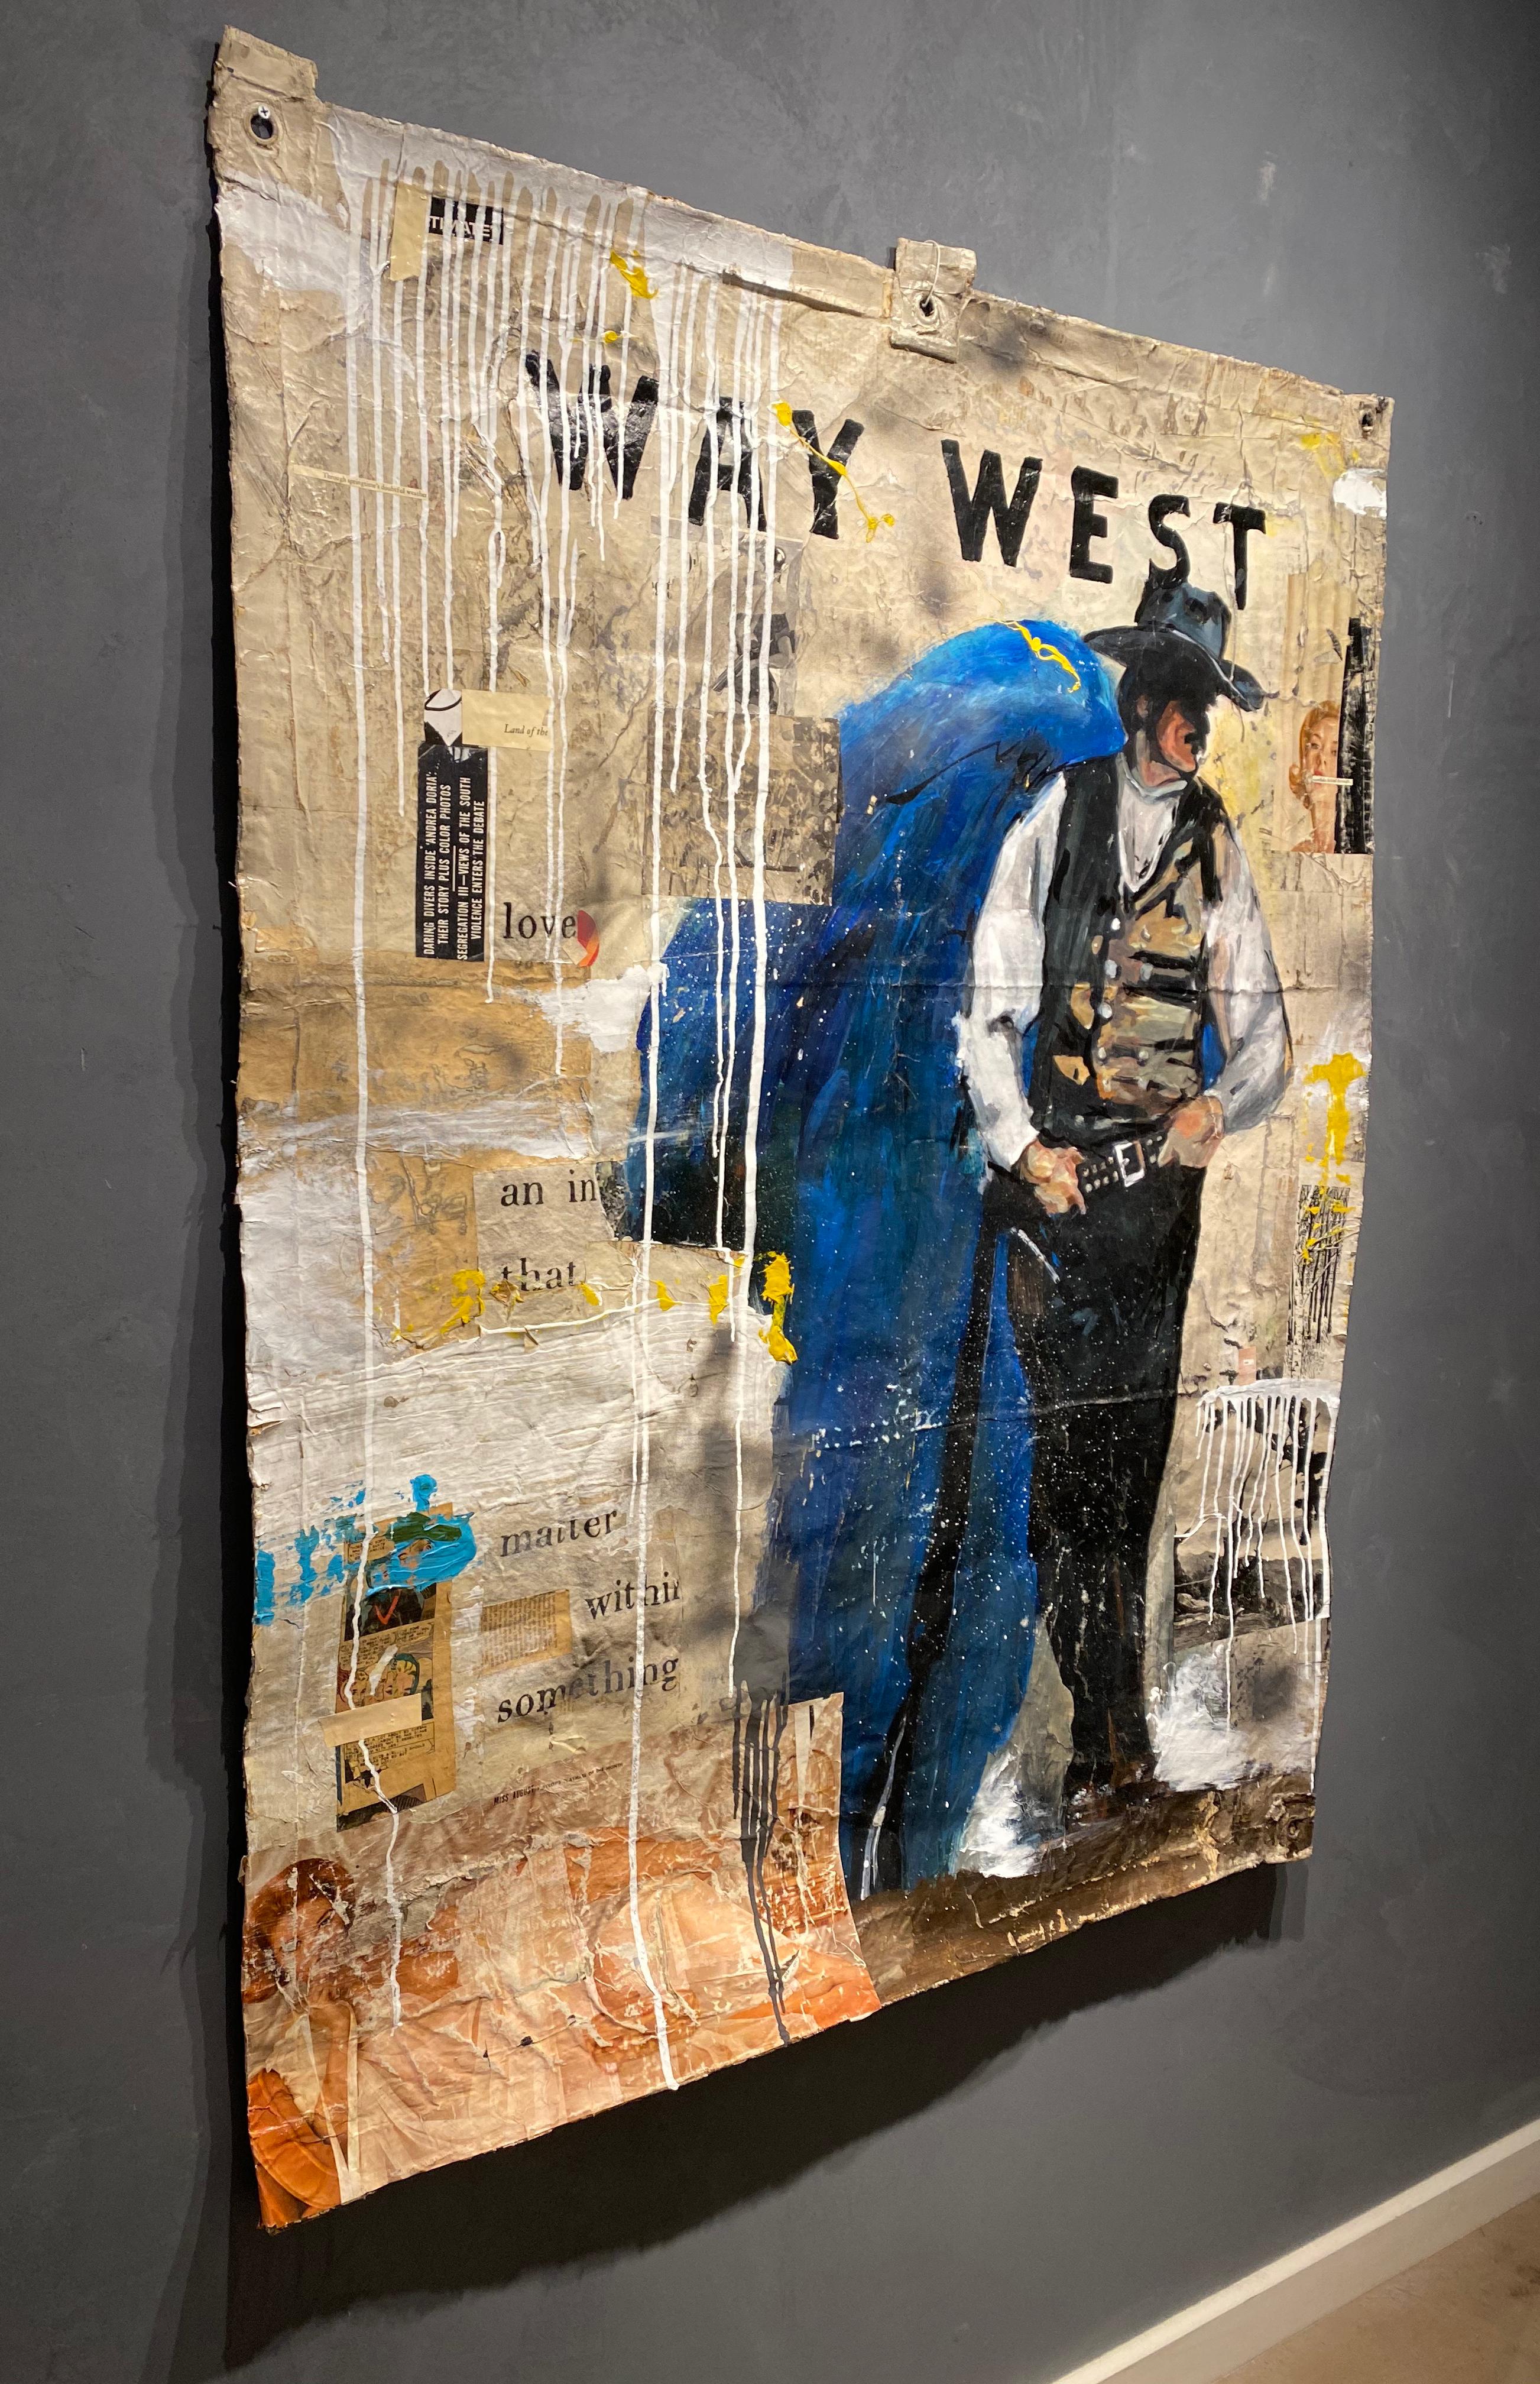 This unique mixed media painting from Greg Miller is on un-stretched canvas with rivets. It hangs like a tapestry, and is a wonderful homage to Americana. 
Considered a neo-pop artist, Miller combines both paint and collage to create bold pop